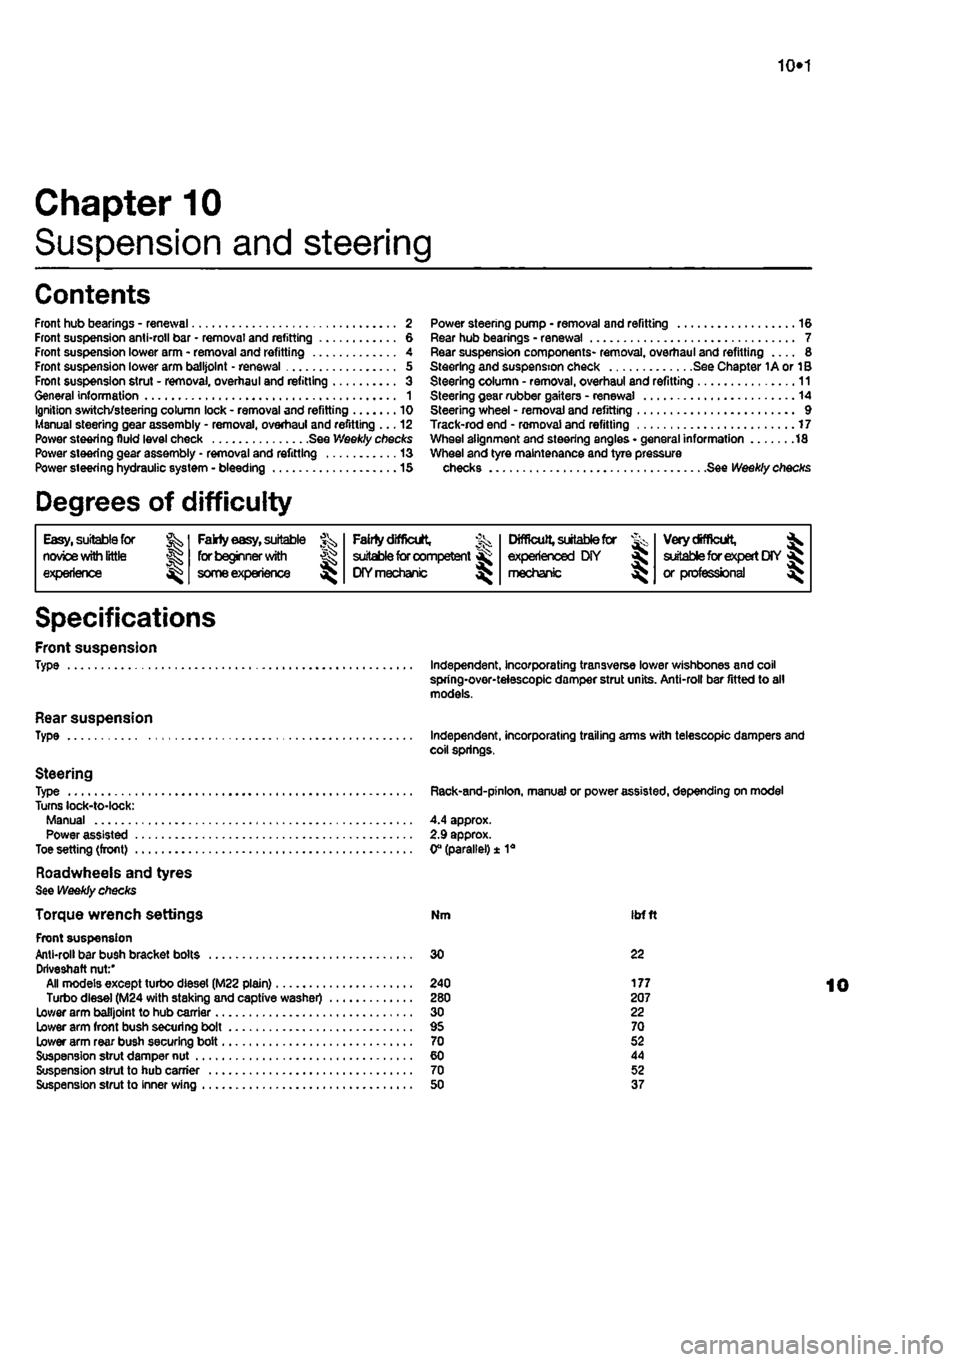 FIAT PUNTO 1995 176 / 1.G Service Manual 
10*1 
Chapter 10 
Suspension and steering 
Contents 
Front hub bearings - renewal 2 Front suspension anti-roll bar • removal and refitting 6 Front suspension lower arm - removal and refitting 4 Fro